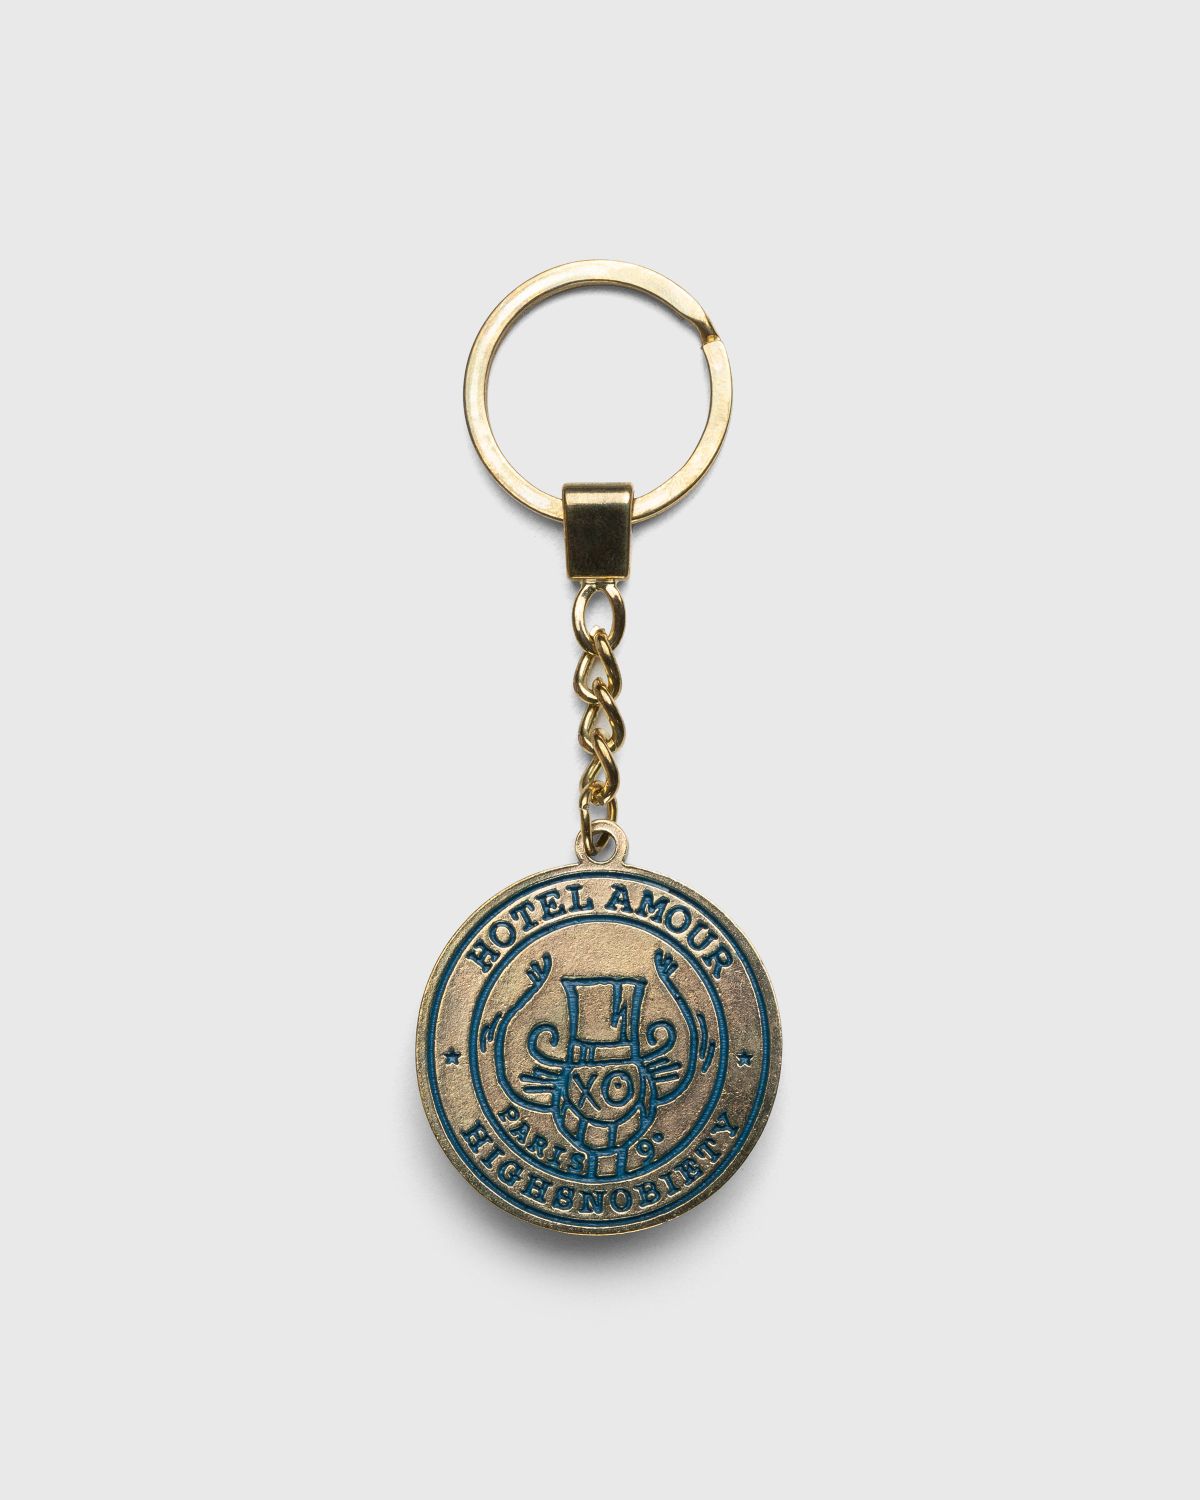 Hotel Amour x Highsnobiety – Not In Paris 4 Keychain Gold - Keychains - Gold - Image 1